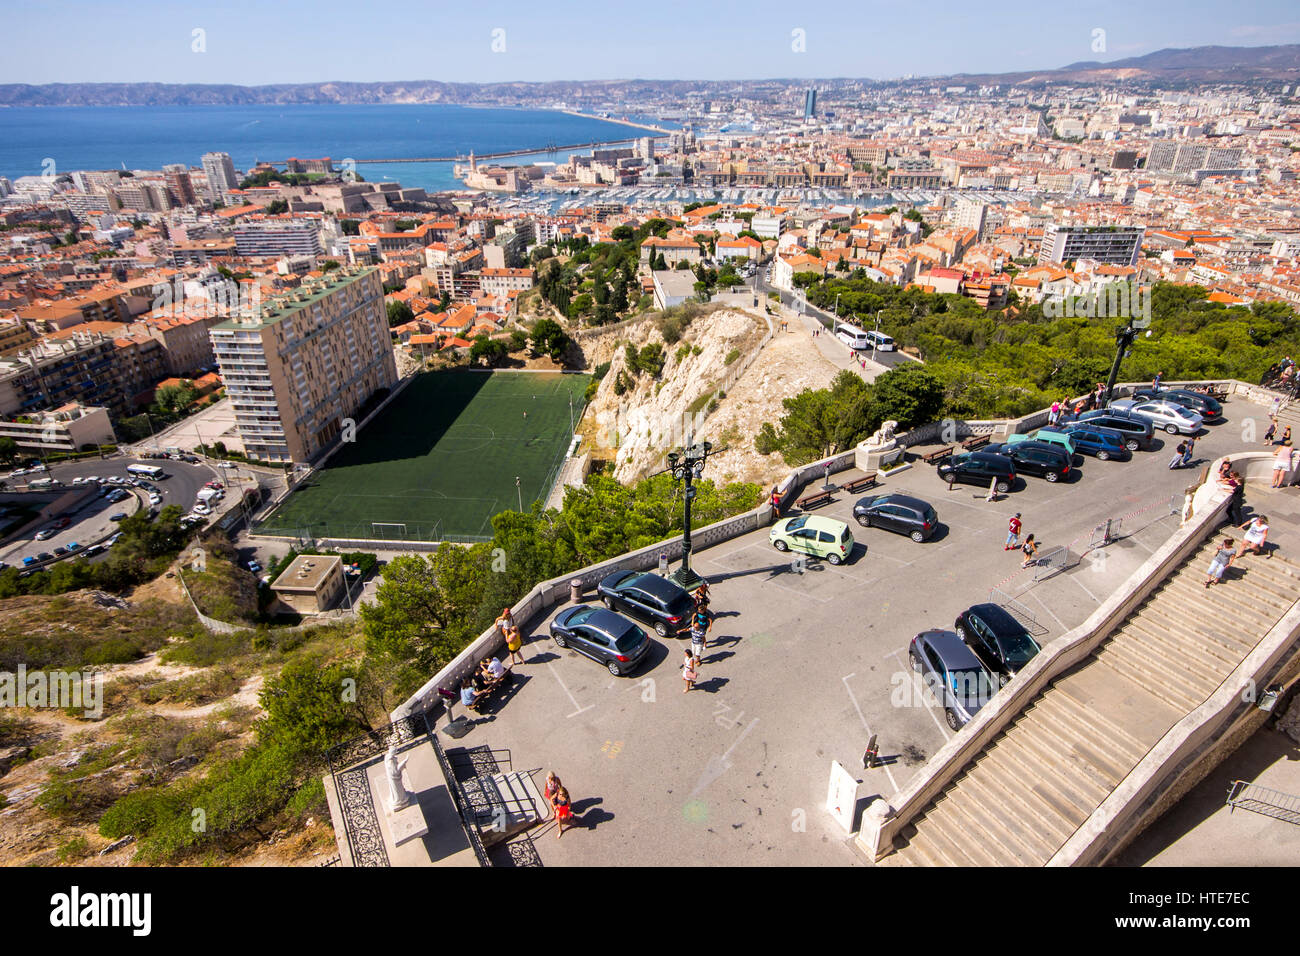 Views of Marseille, France's second largest city, from the church of Notre-Dame de la Garde on a beautiful summer day. Stock Photo